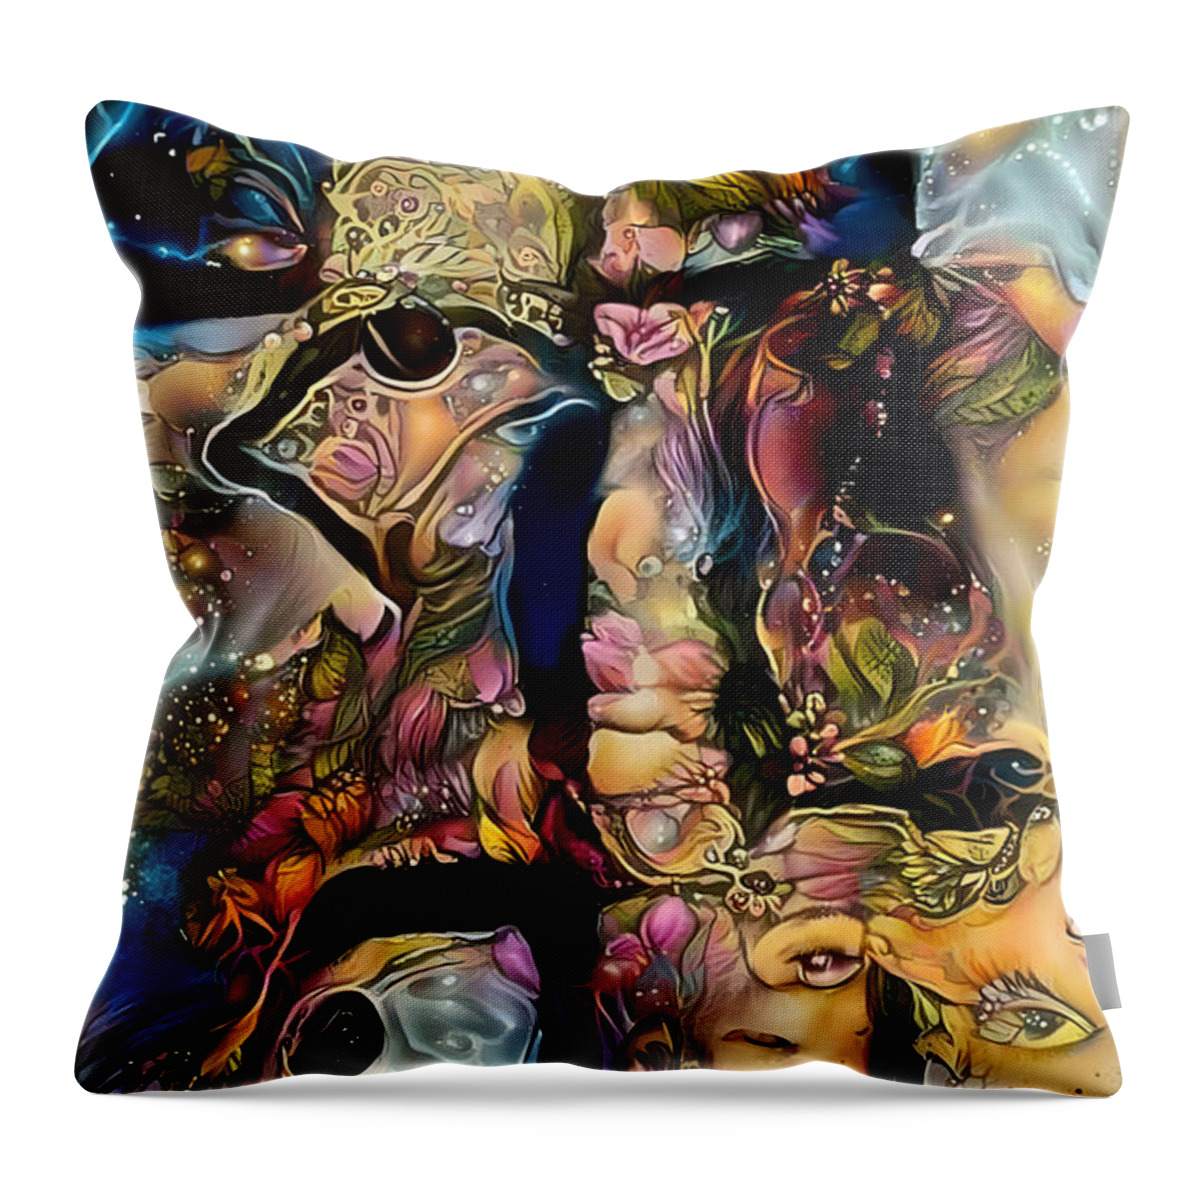 Contemporary Art Throw Pillow featuring the digital art 39 by Jeremiah Ray